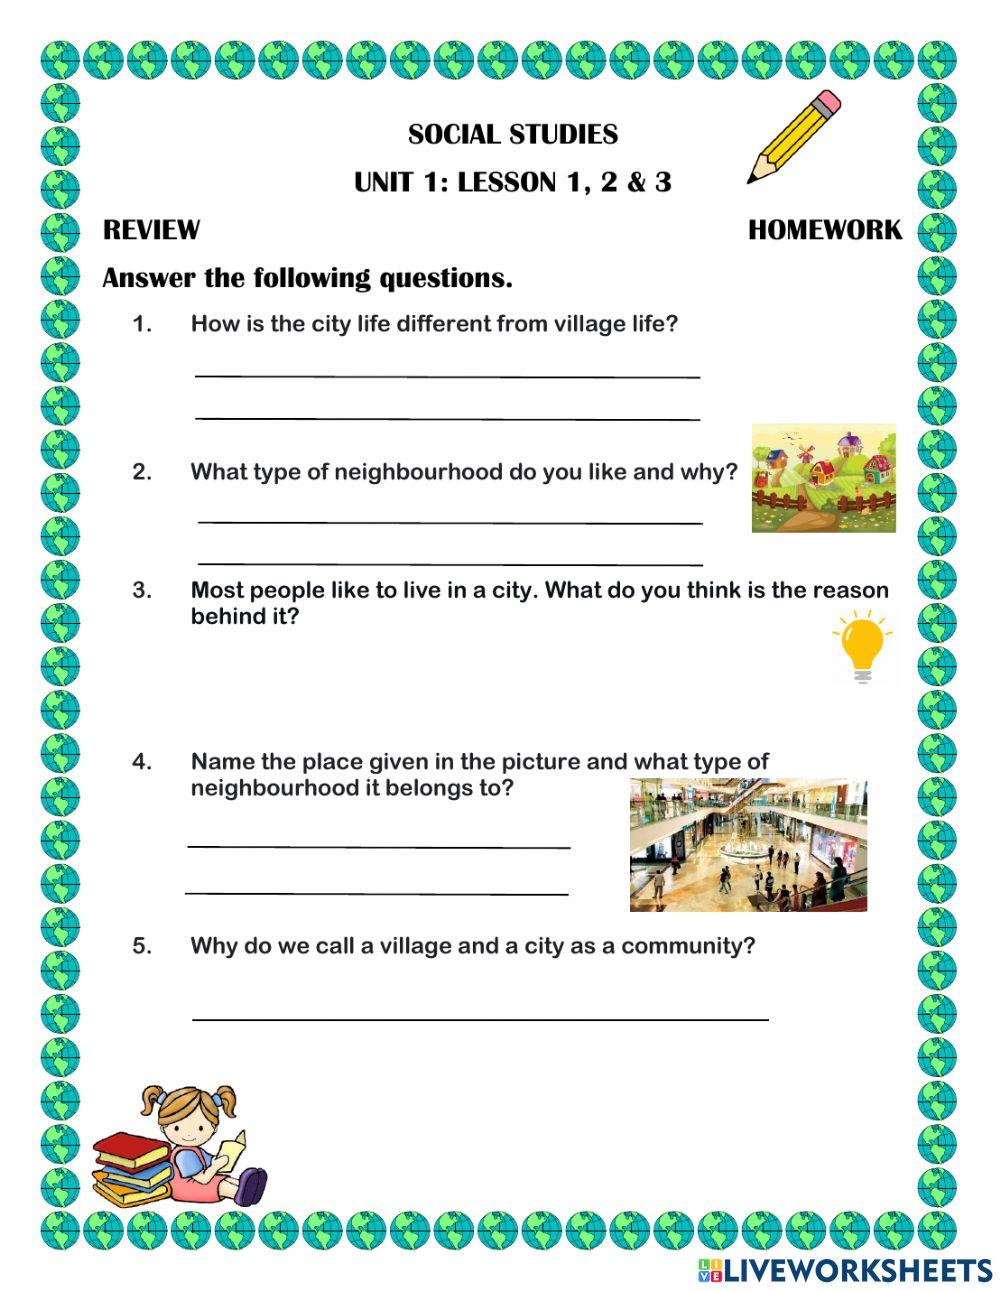 End of lessons compiled Homework sheet